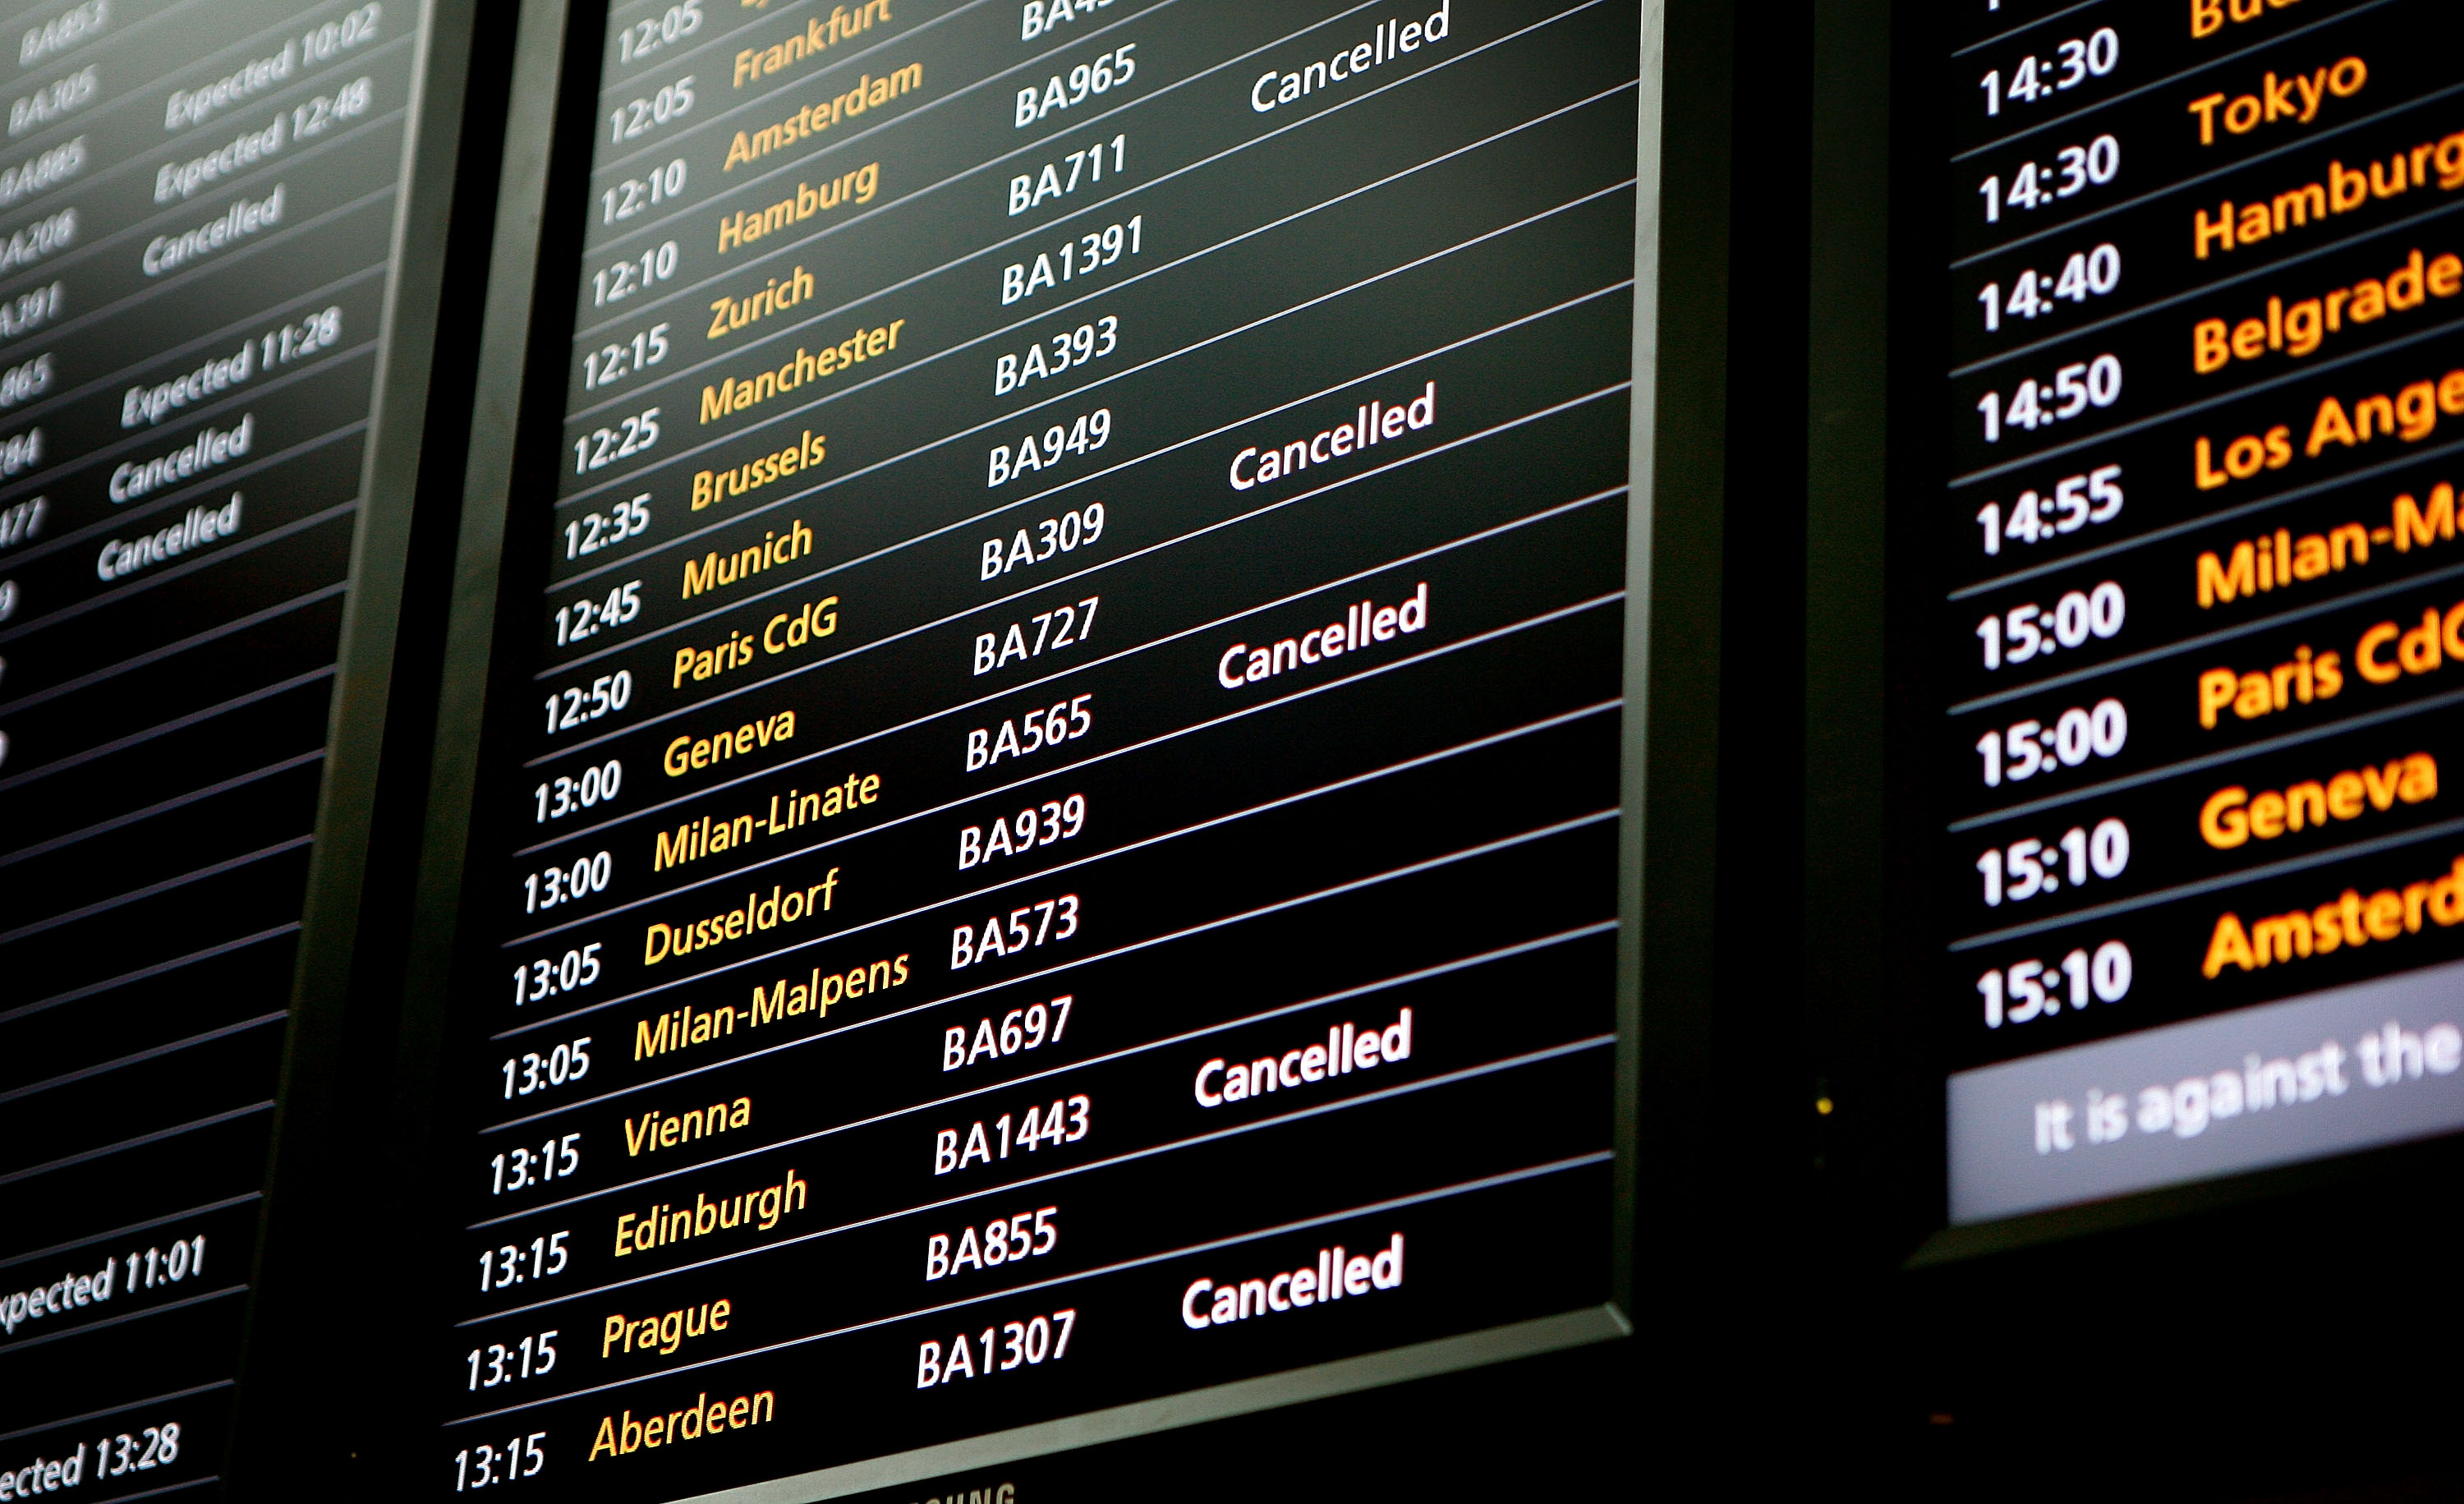 UK airlines and airports lag behind global rivals when it comes to